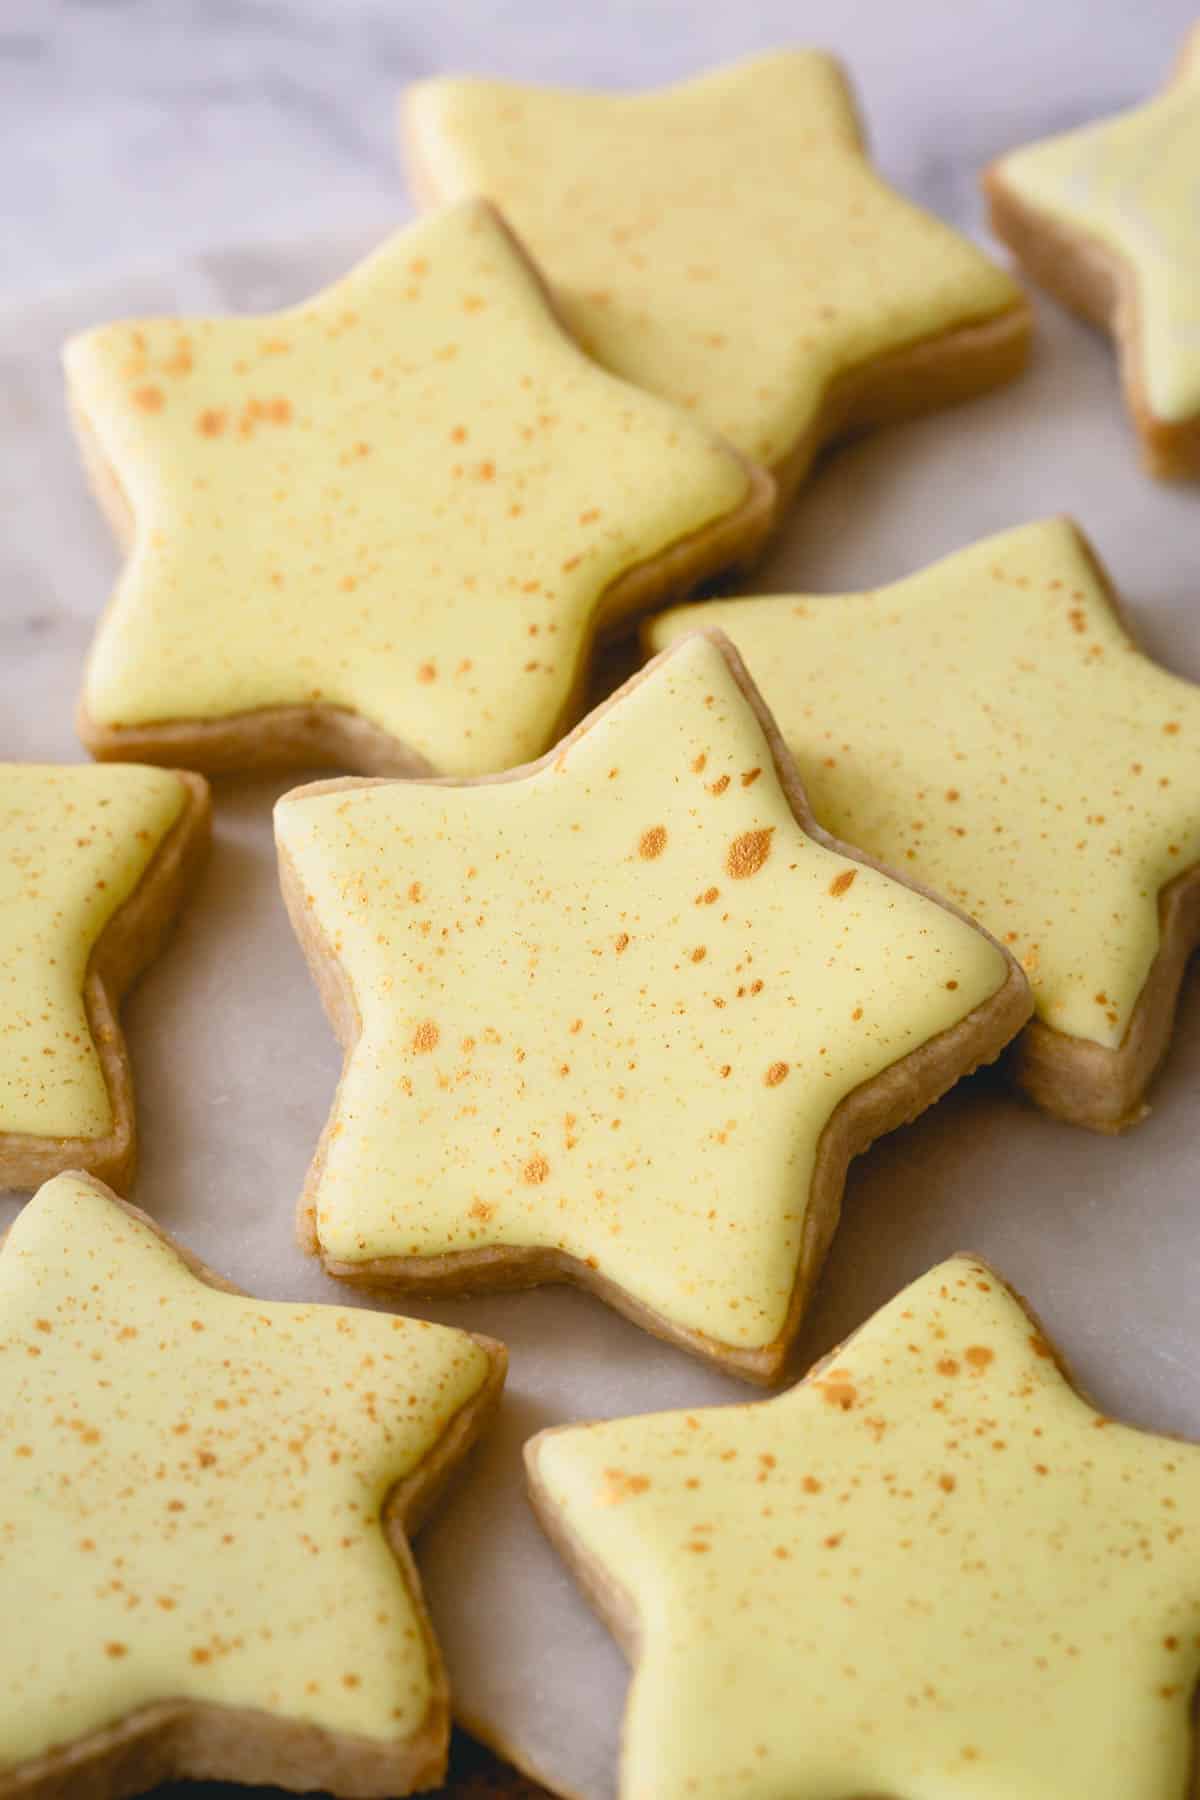 Star shaped sugar cookies frosted with yellow royal icing and gold speckles.